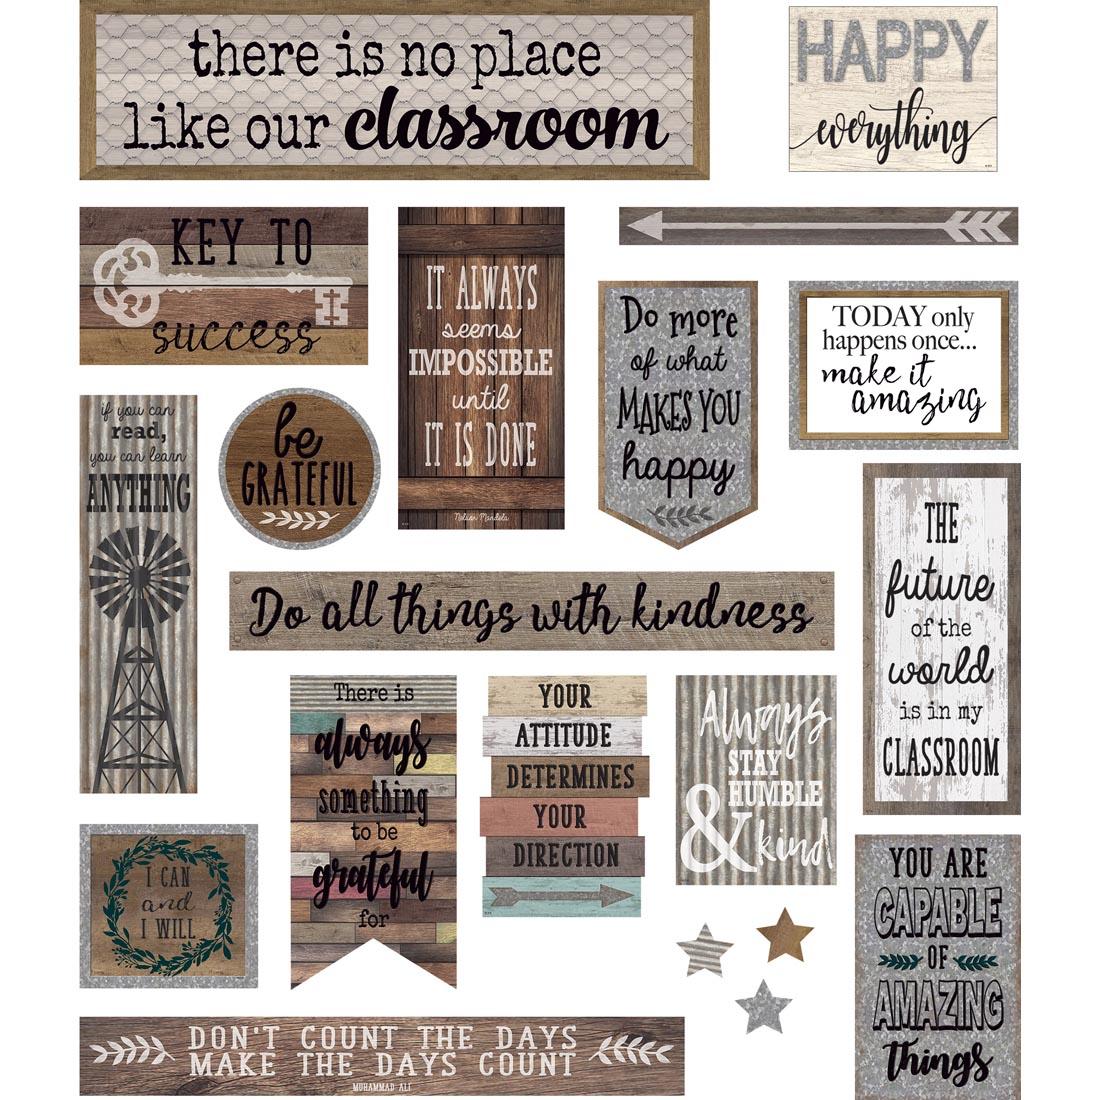 Mini Bulletin Board Set from the Home Sweet Classroom collection by Teacher Created Resources